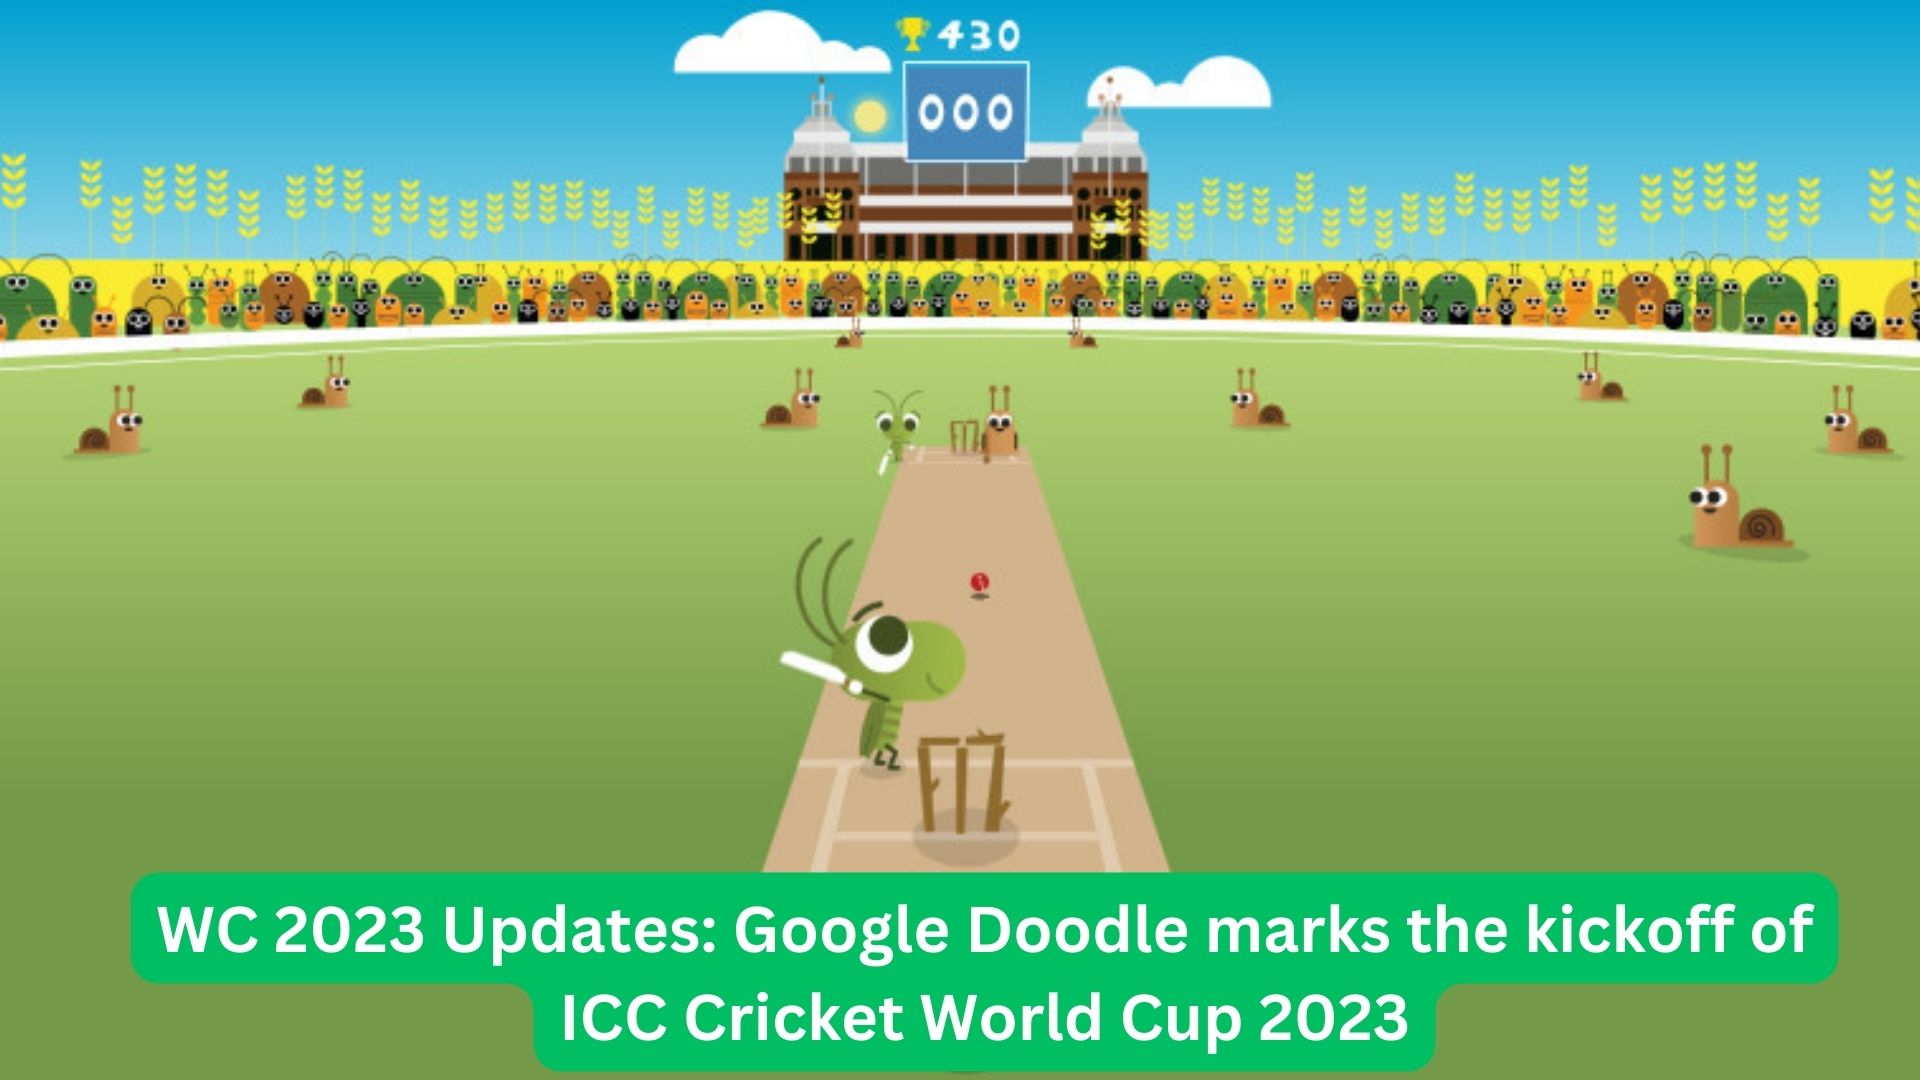 WC 2023 Updates: Google Doodle marks the kickoff of ICC Cricket World Cup 2023